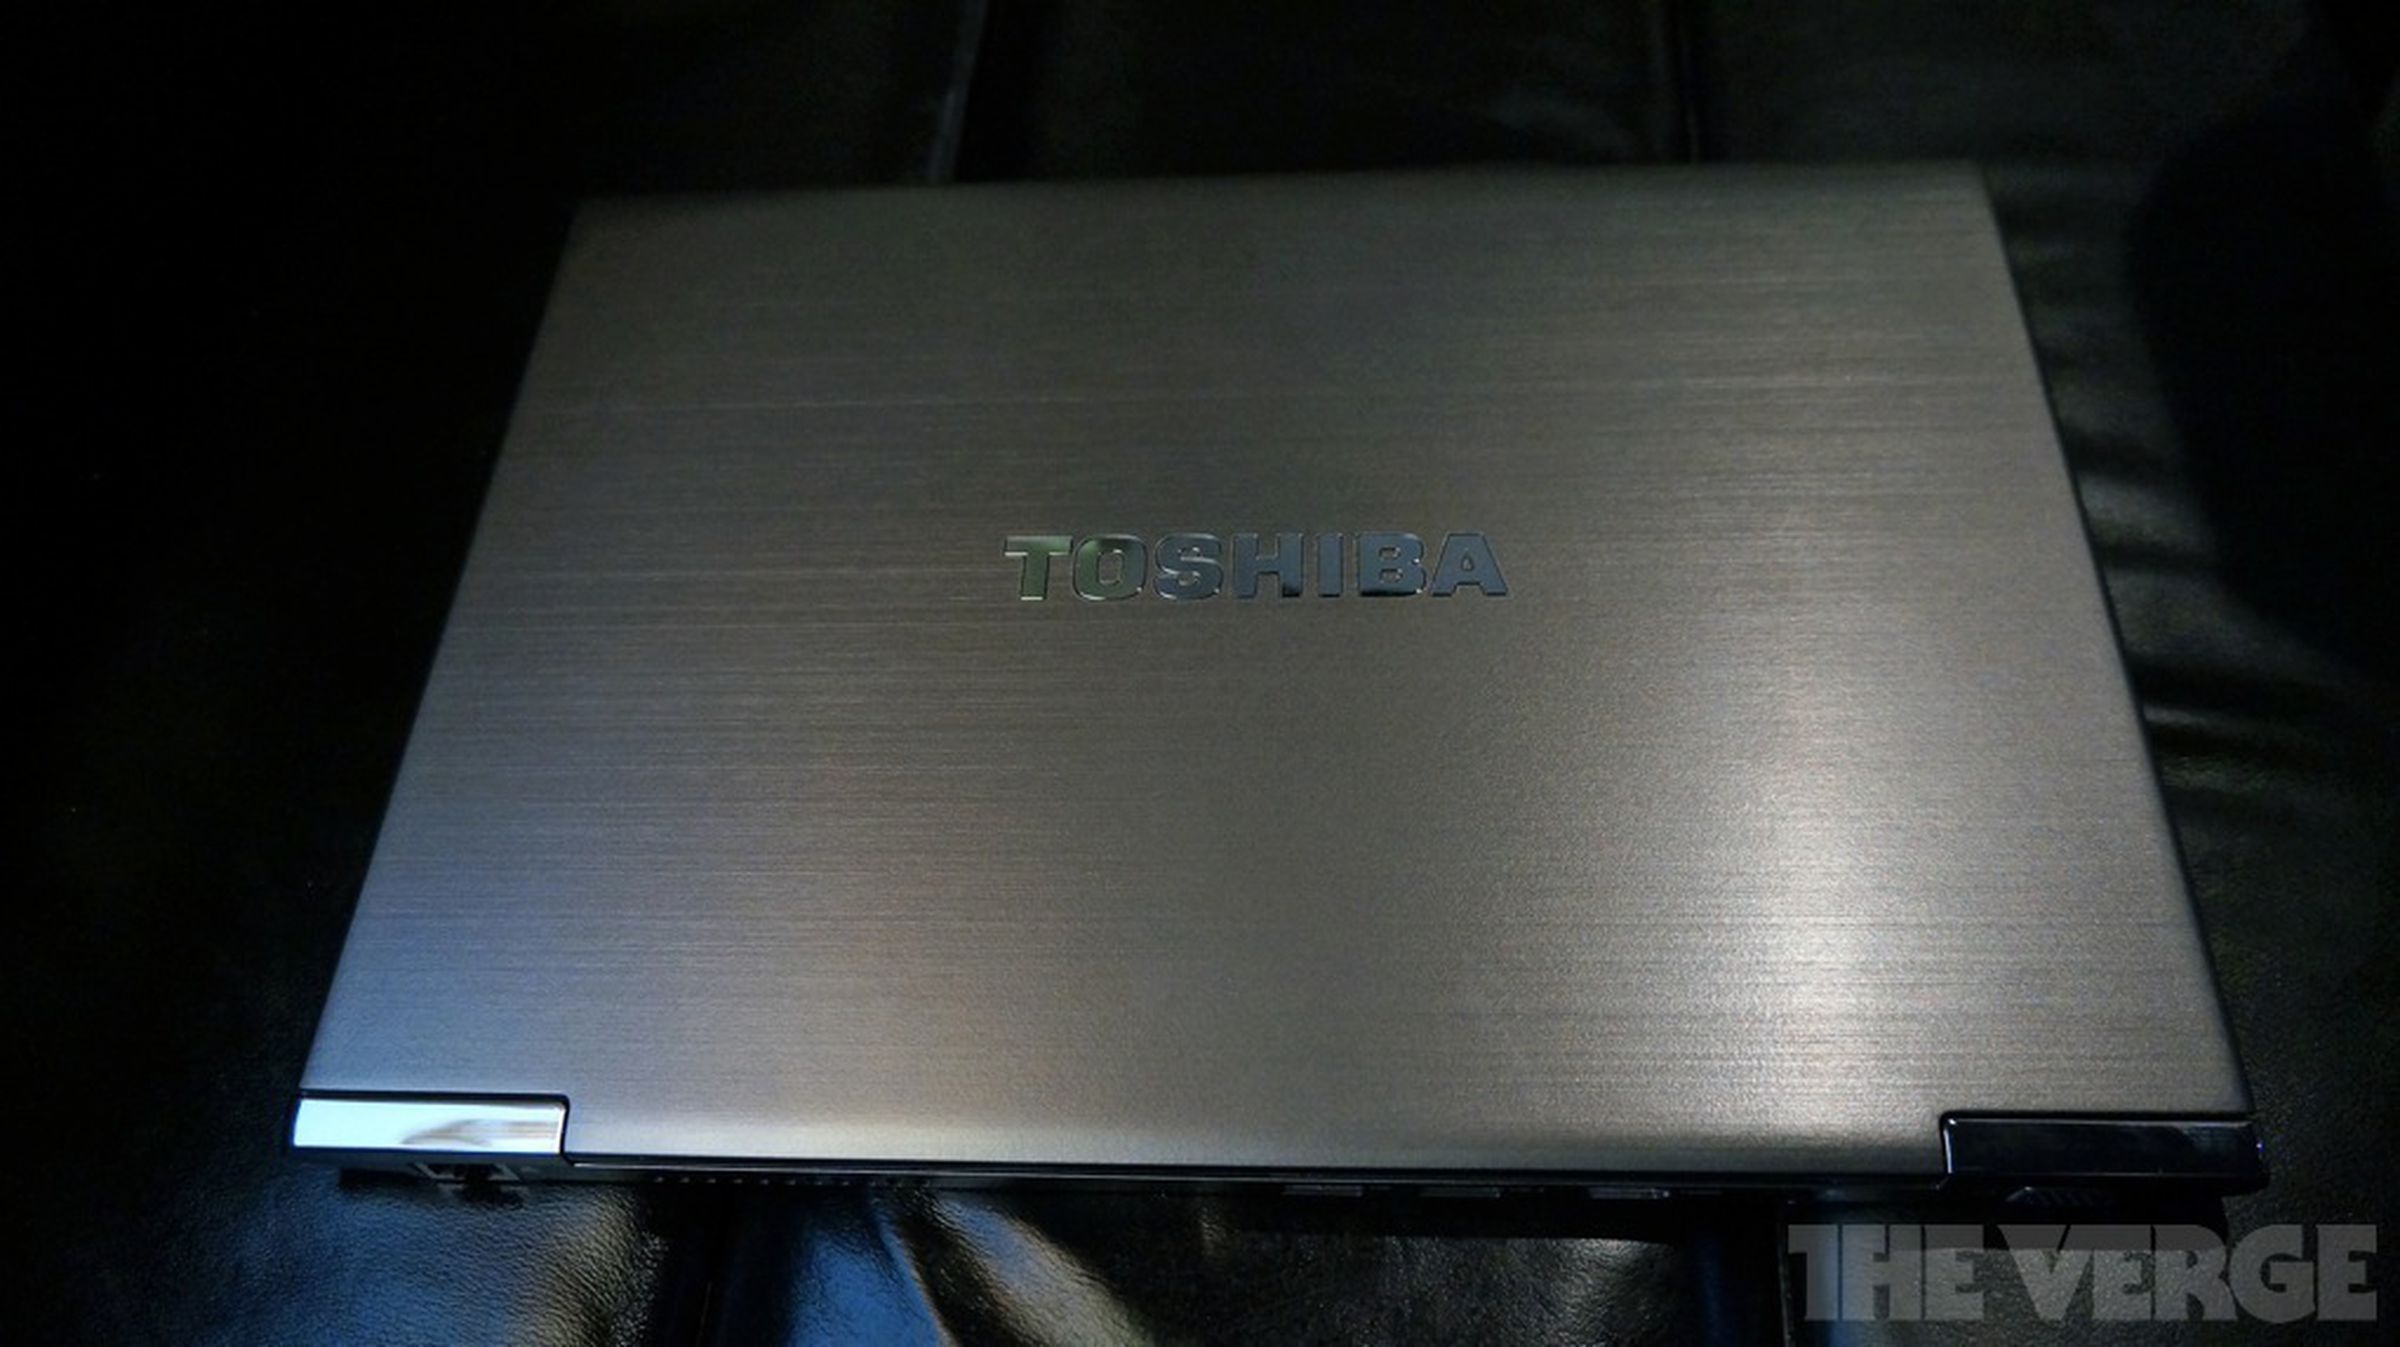 Toshiba Portege Z930 hands-on pictures